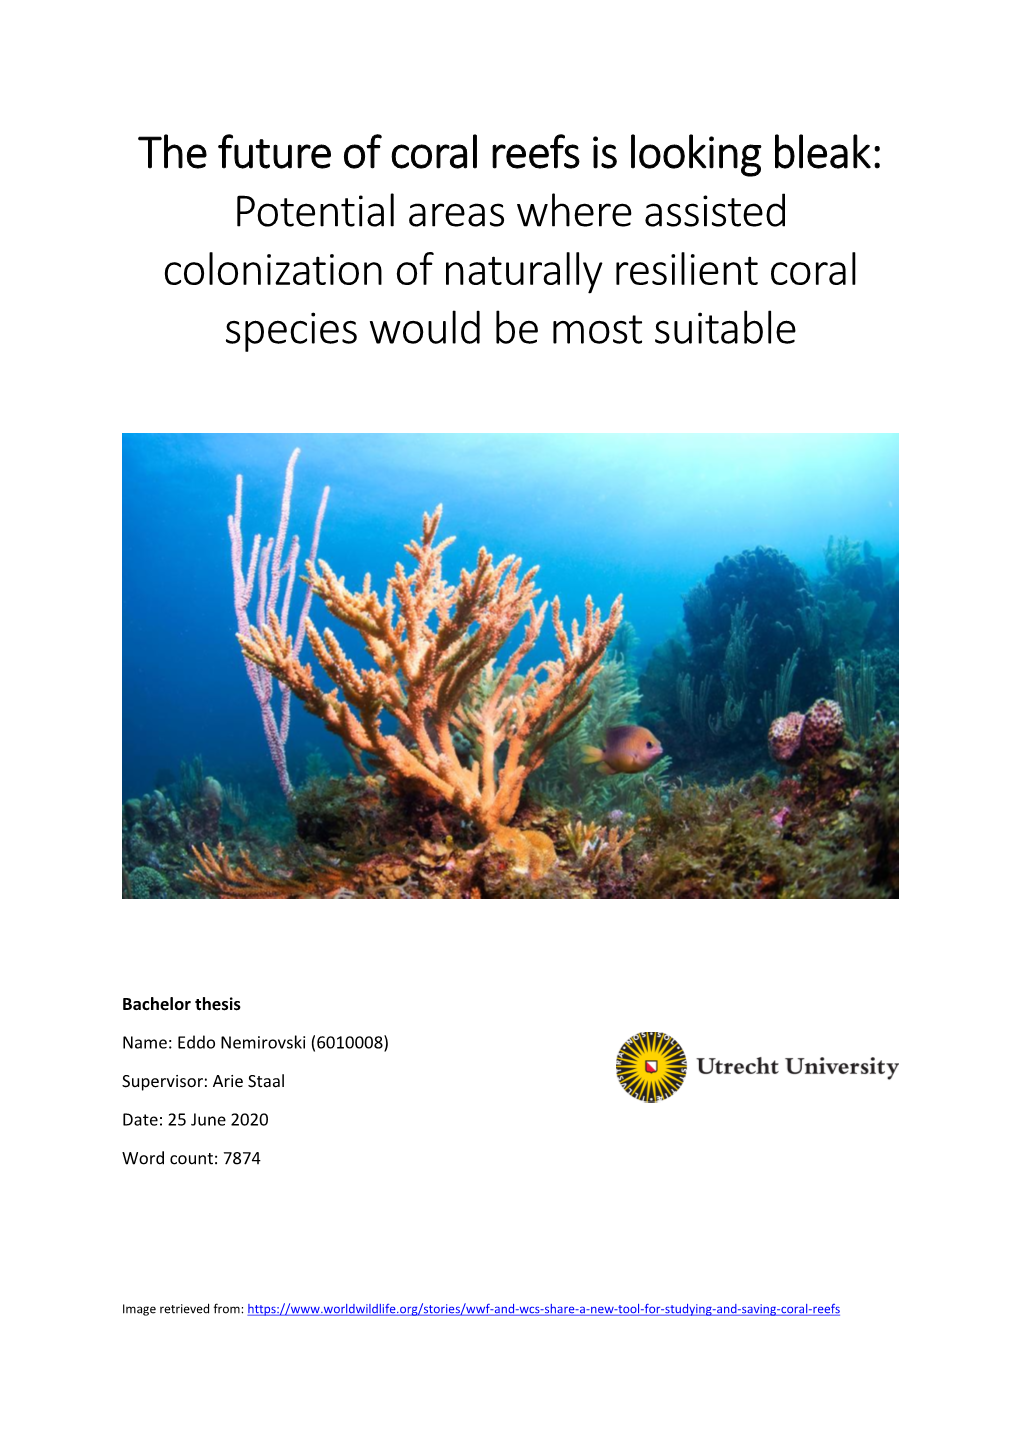 The Future of Coral Reefs Is Looking Bleak: Potential Areas Where Assisted Colonization of Naturally Resilient Coral Species Would Be Most Suitable